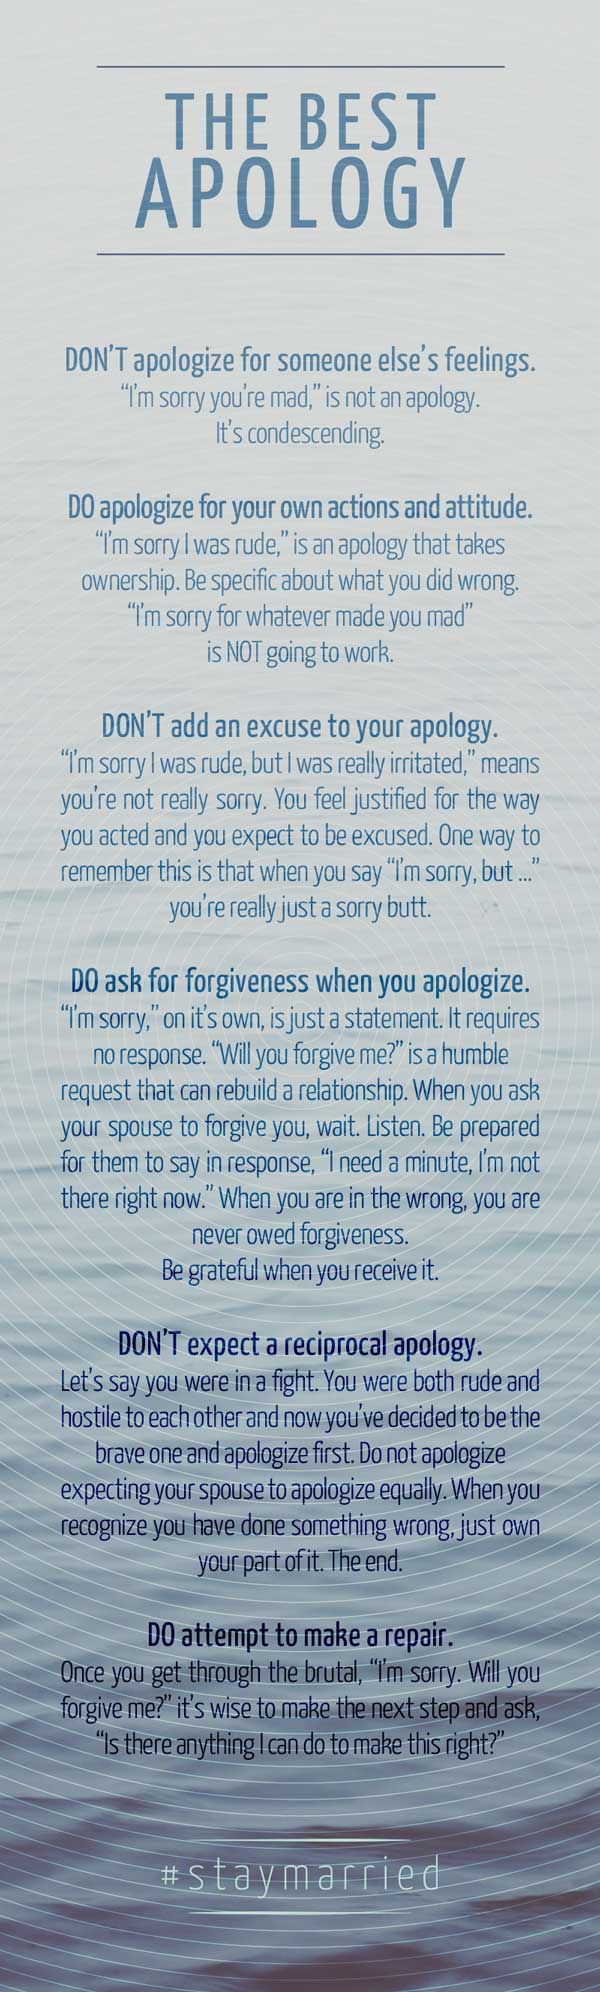 The Best Apology